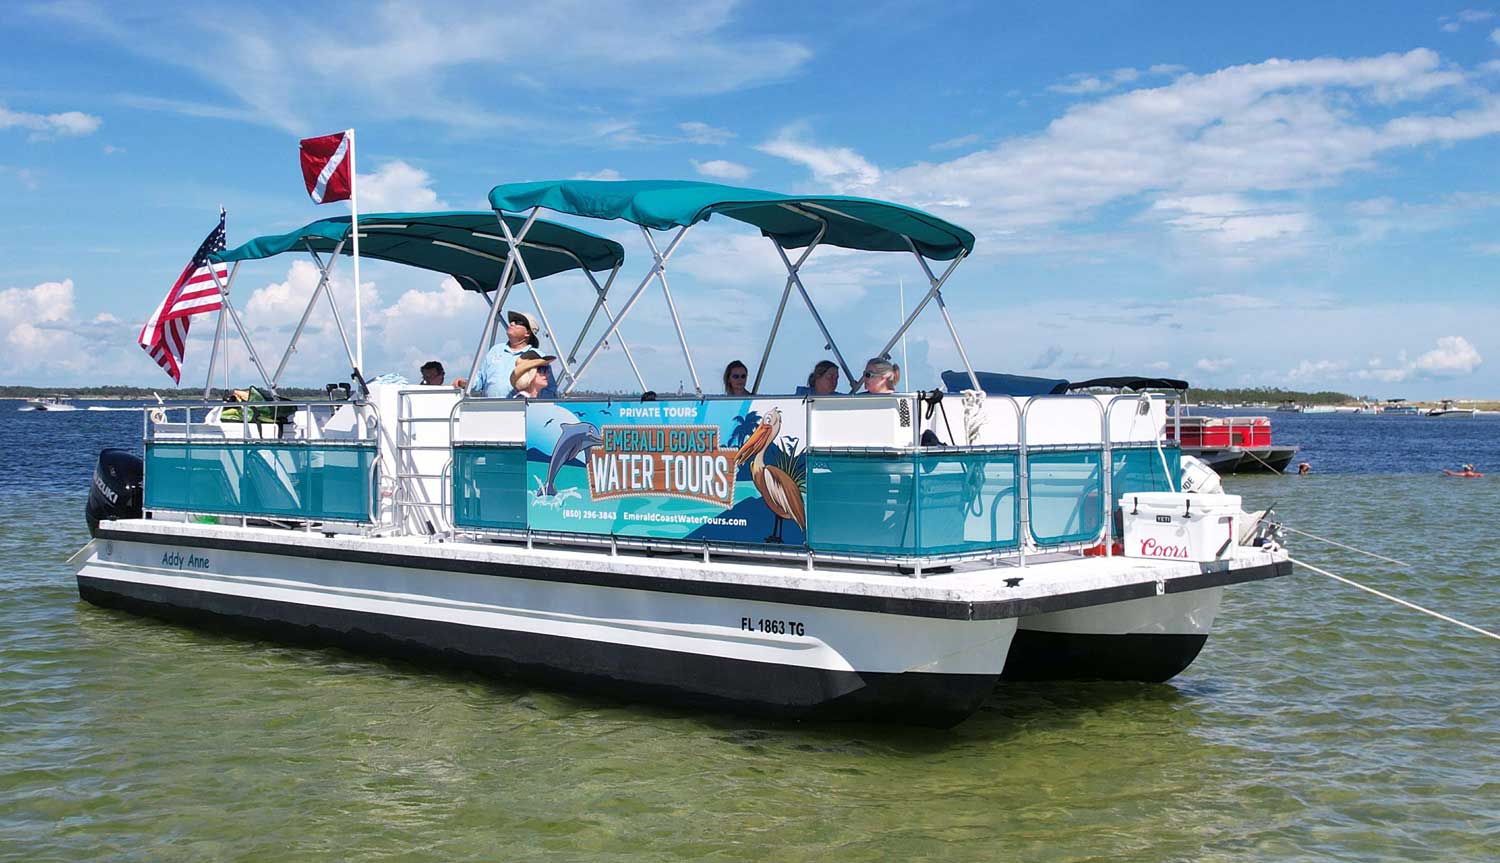 Trends in the Rental Boat Industry